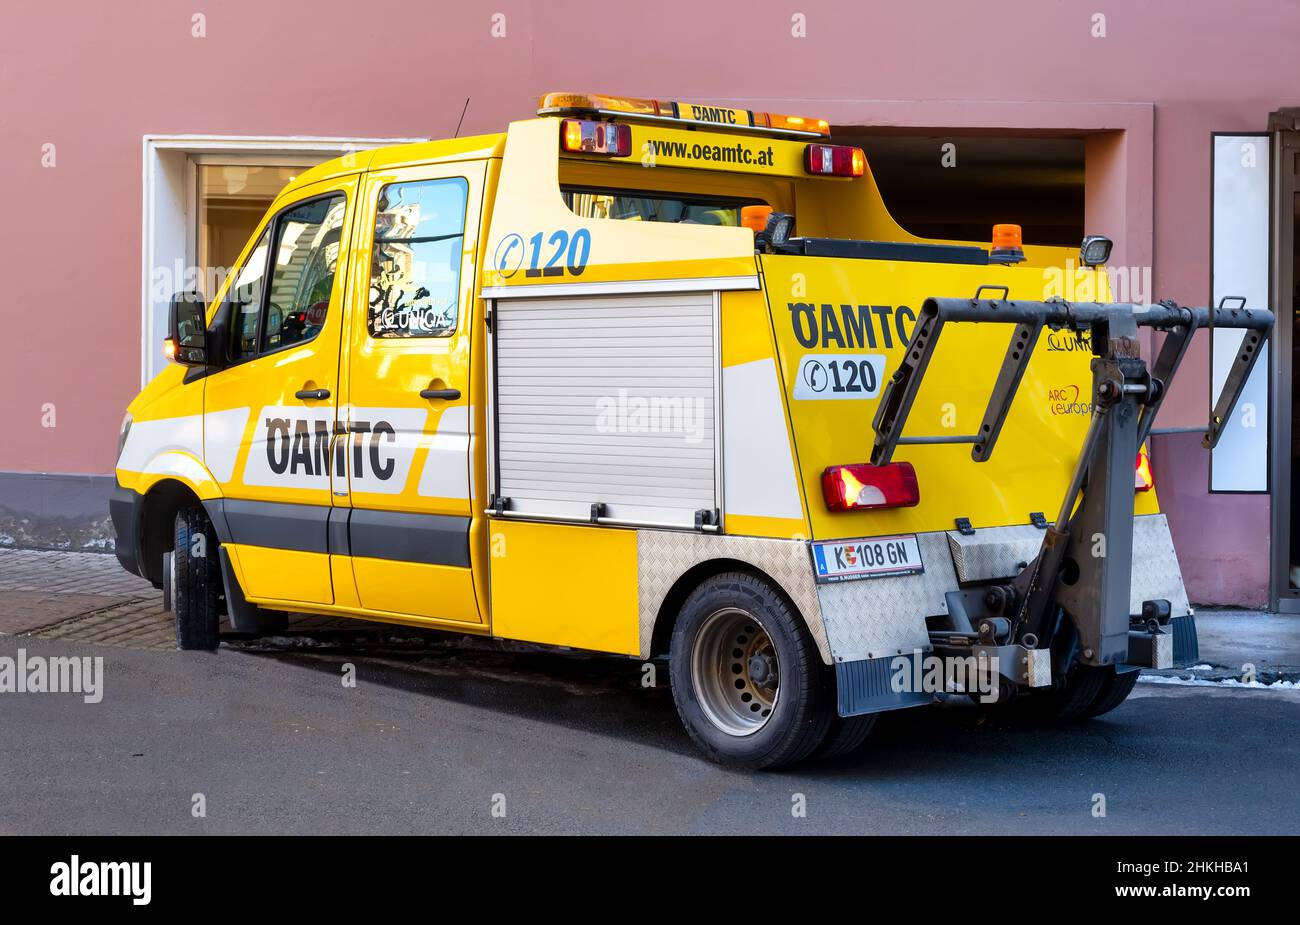 Austria, 2022: Towing vehicle from ÖAMTC. The Austrian Automobile, Motorcycle and Touring Club ( ÖAMTC) is a traffic club in Austria. Stock Photo